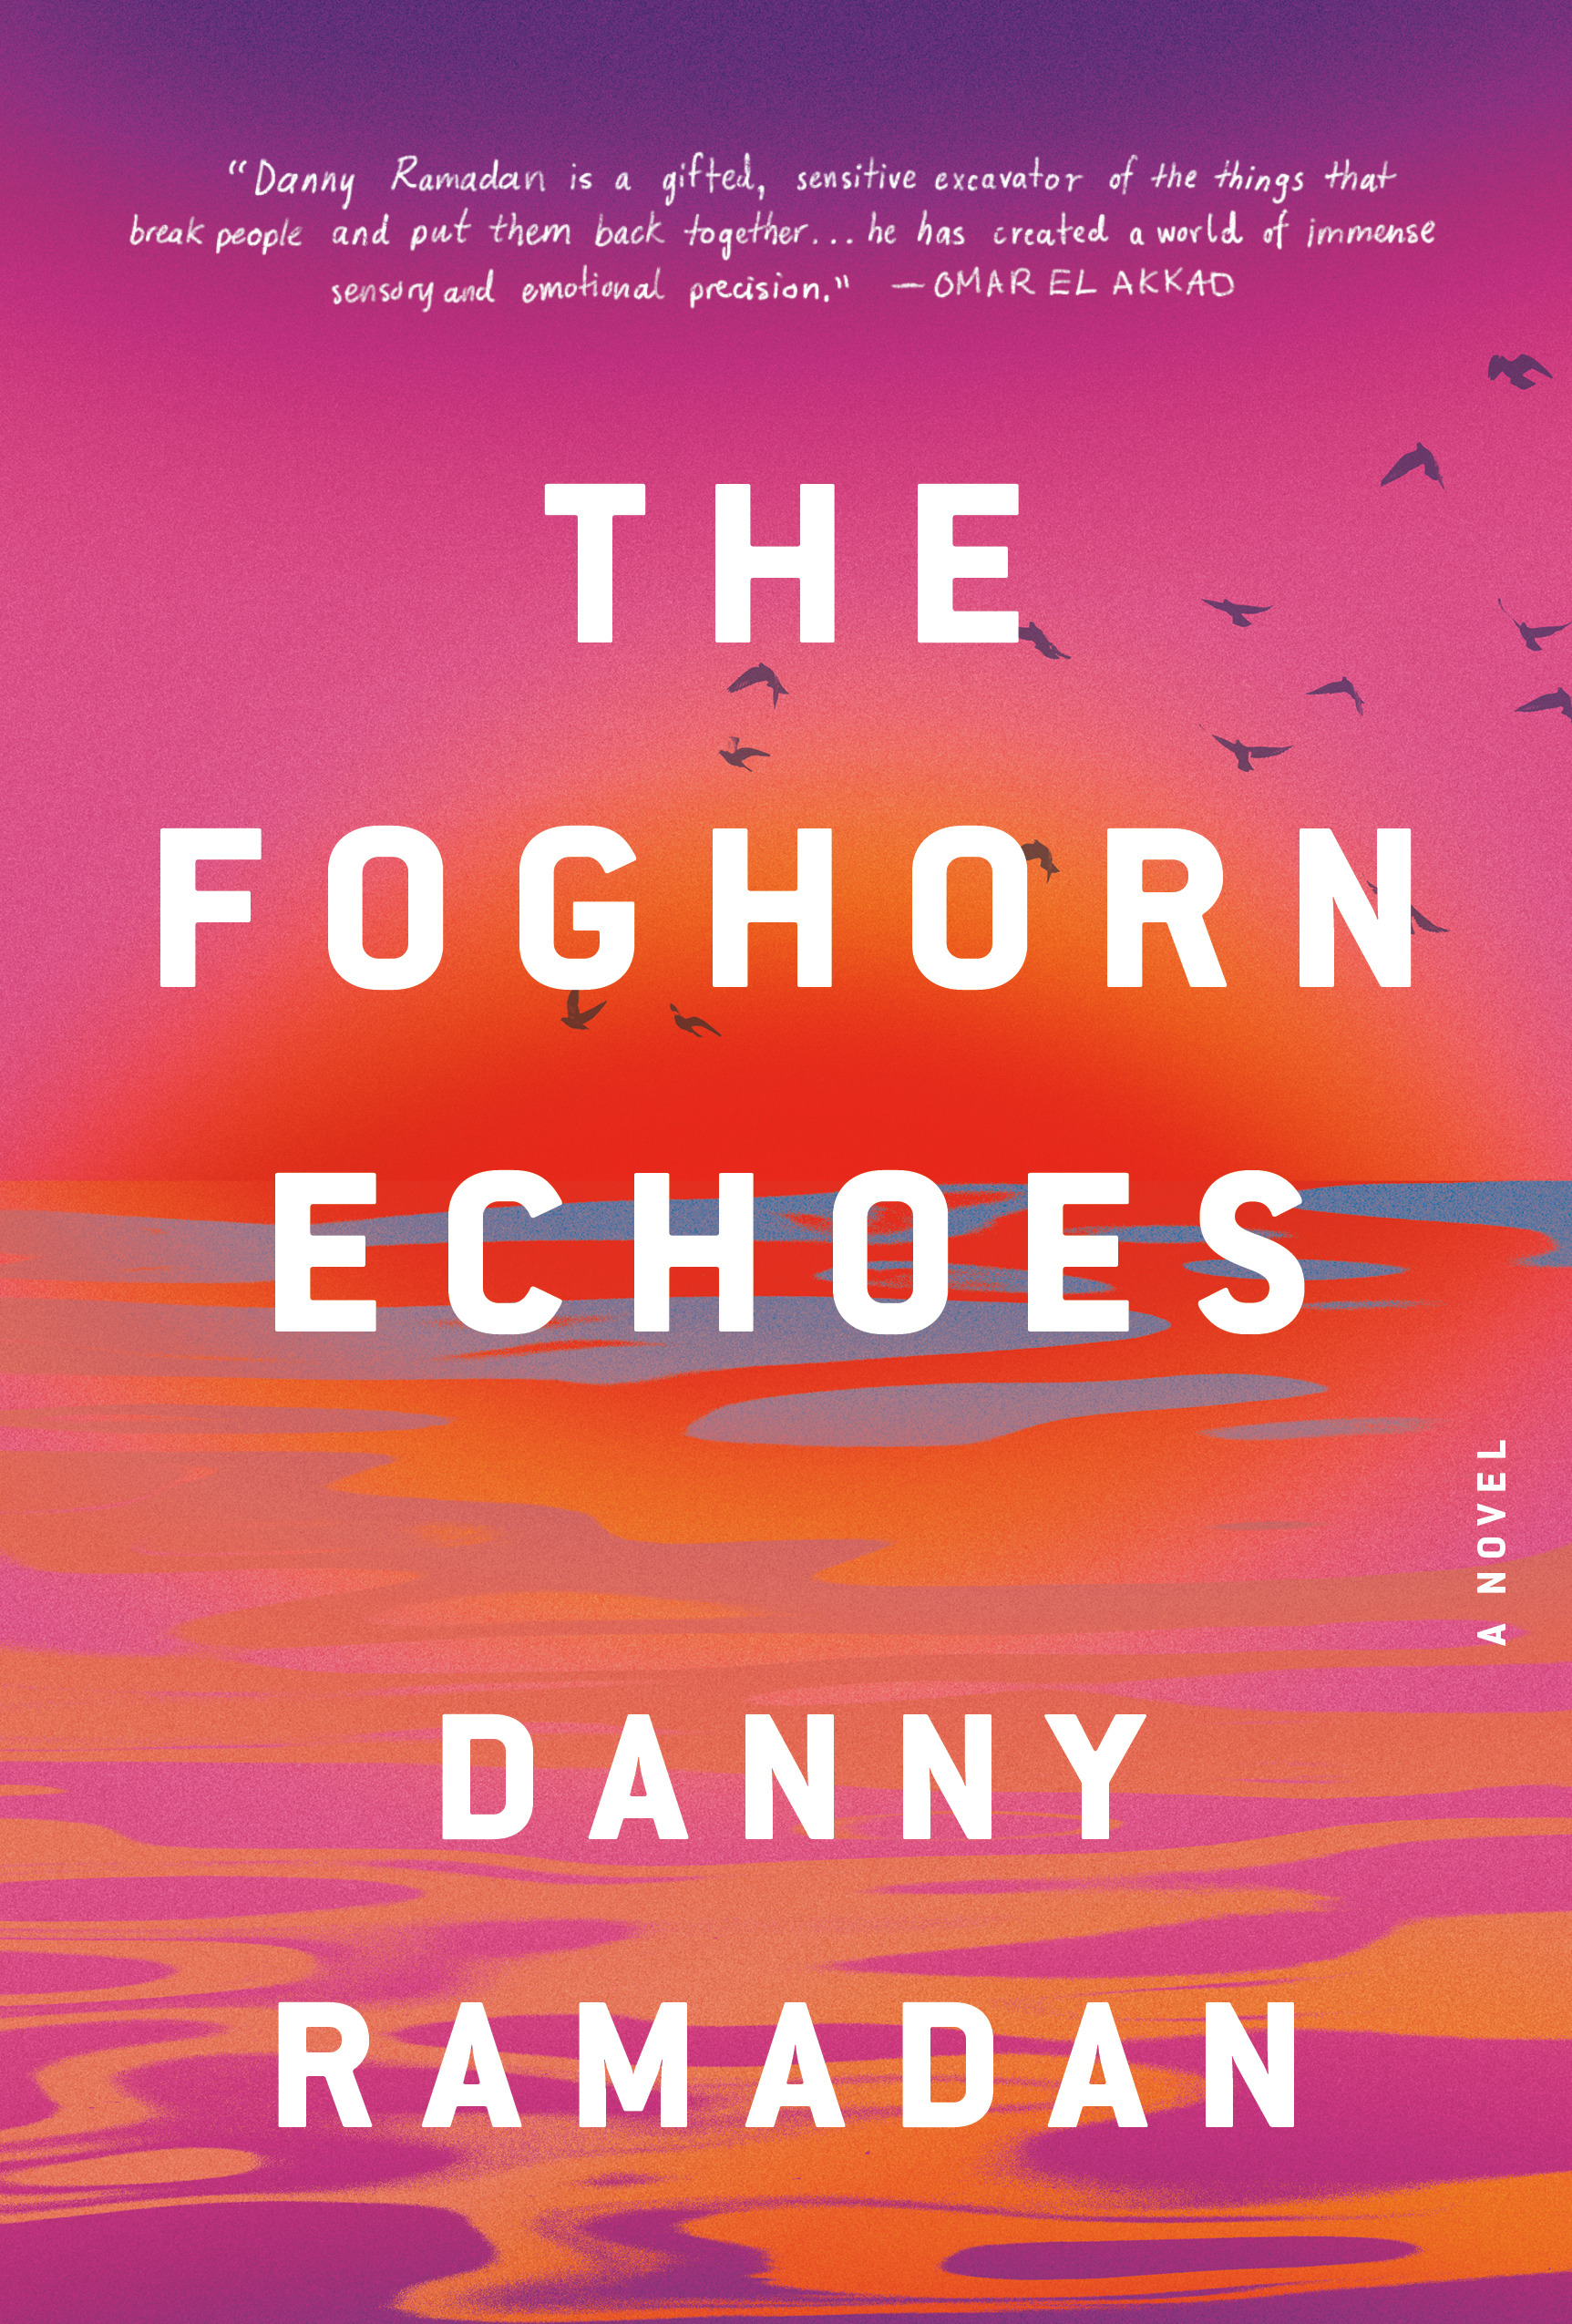 Danny Ramadan's The Foghorn Echoes book cover